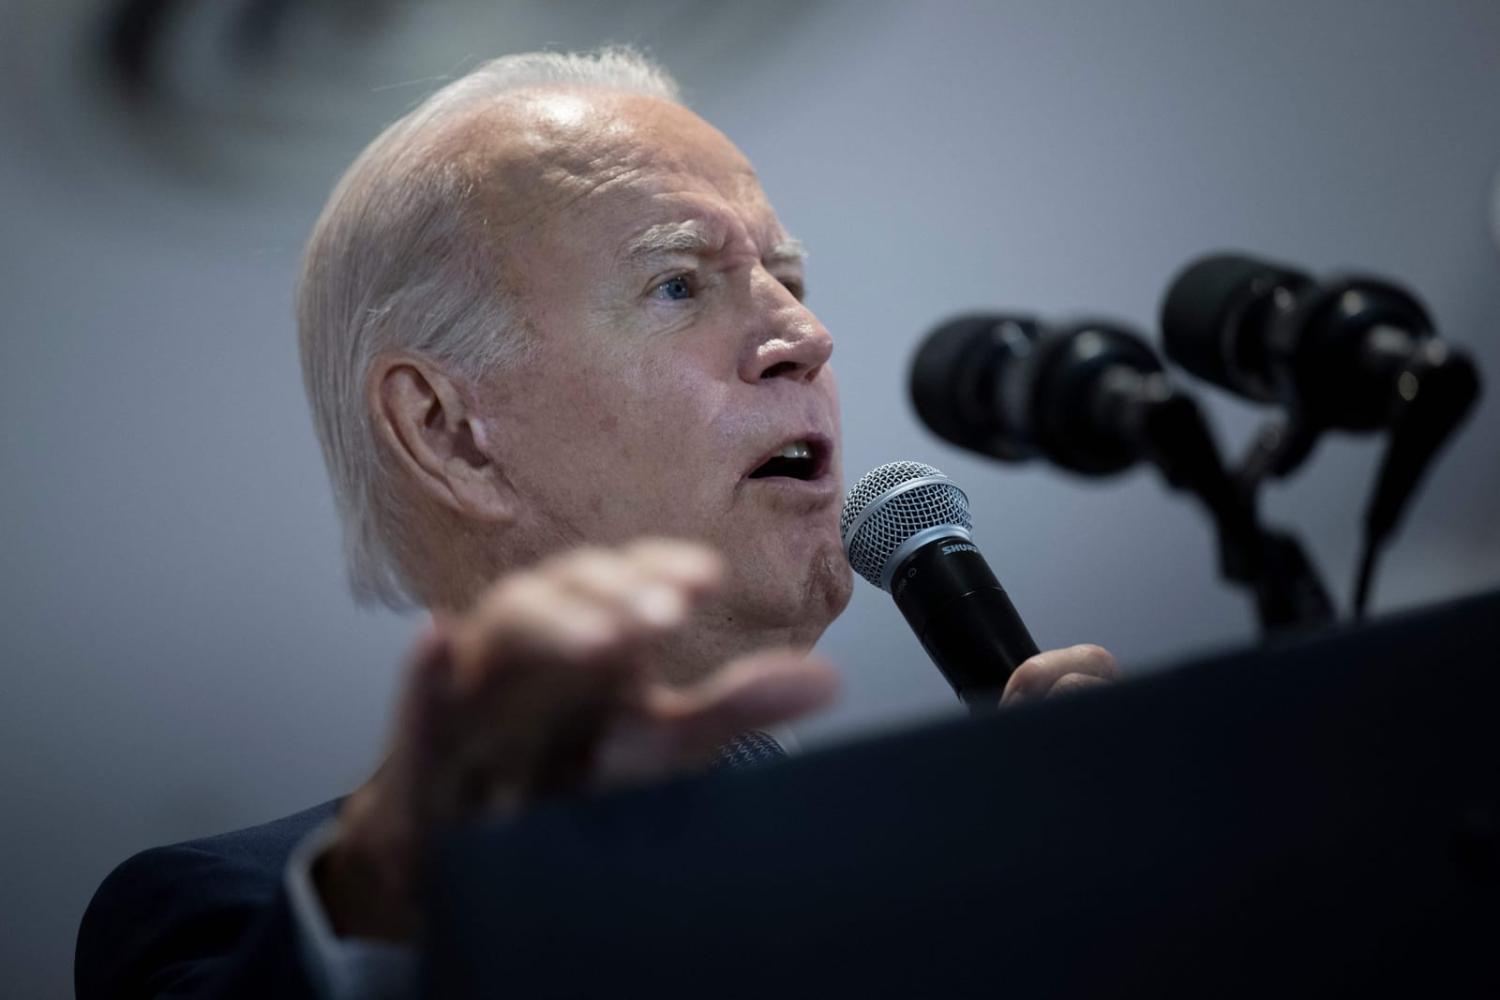 US President Joe Biden: with the fourth repetition, the “fumble” explanation has become frankly implausible (Brendan Smialowski/AFP via Getty Images) 